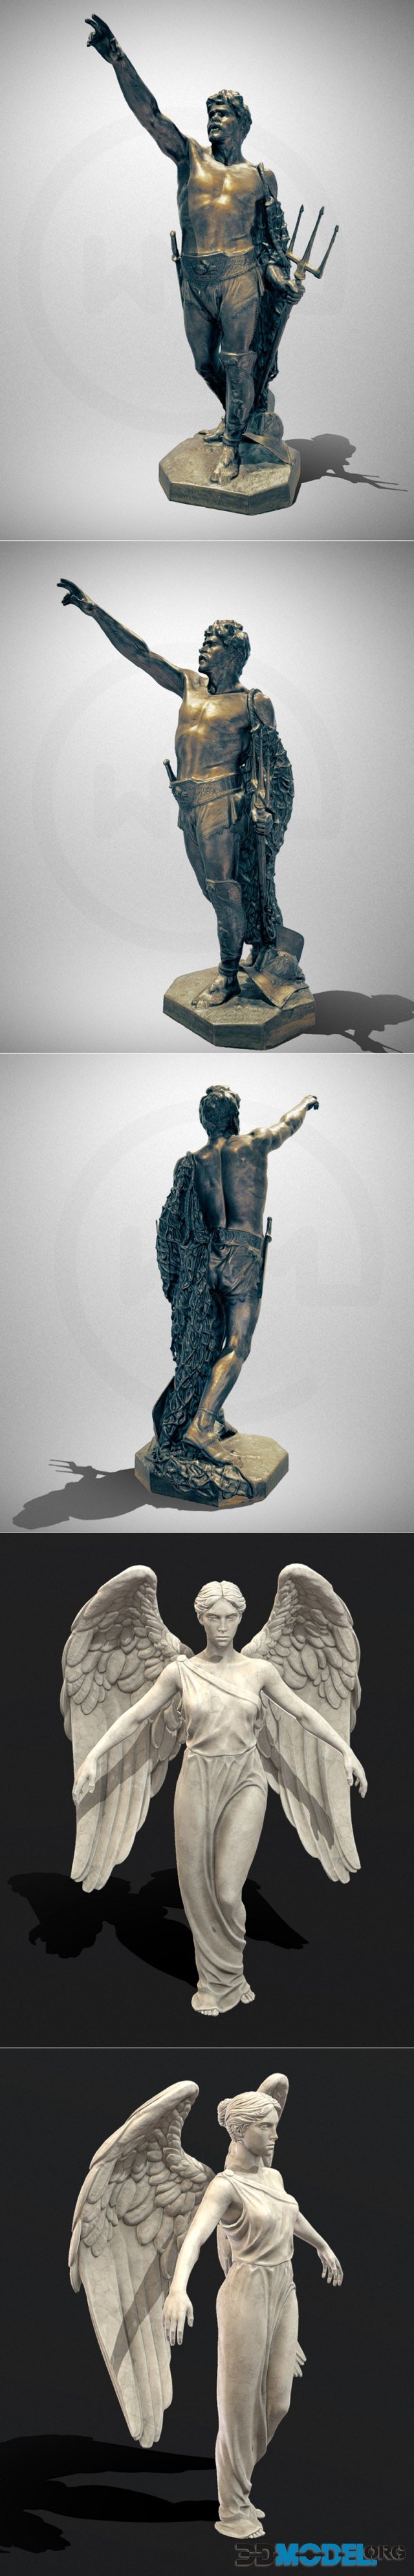 Sculpture of a Roman gladiator and Angel Statue – Printable